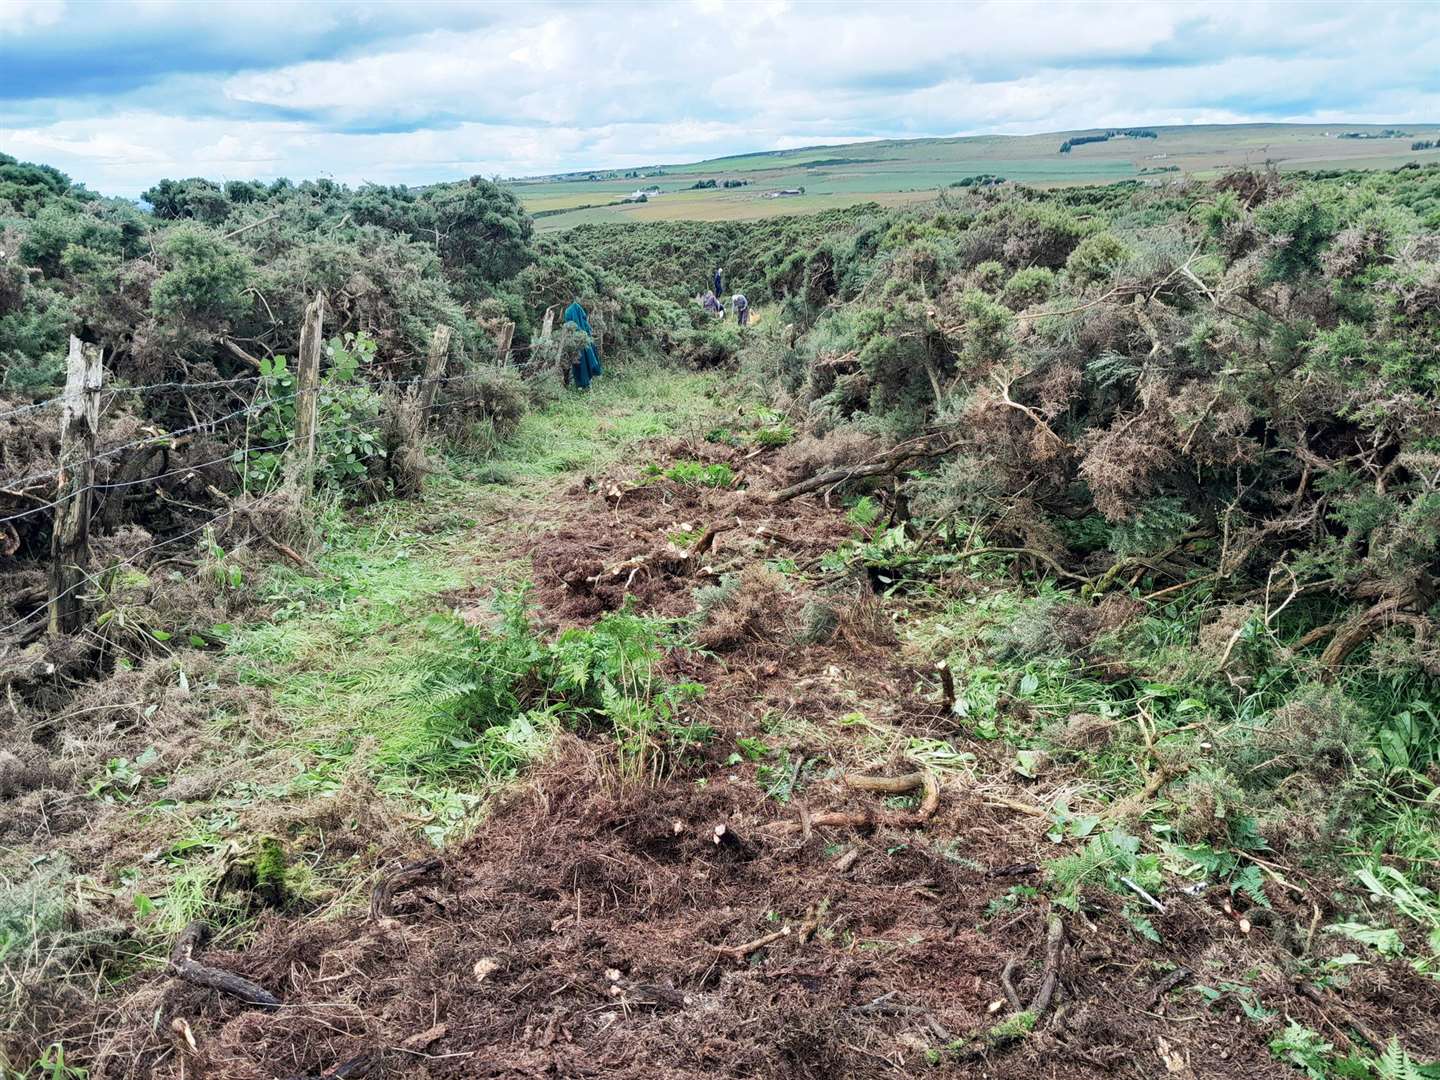 The work included removing invasive gorse that was blocking the route.